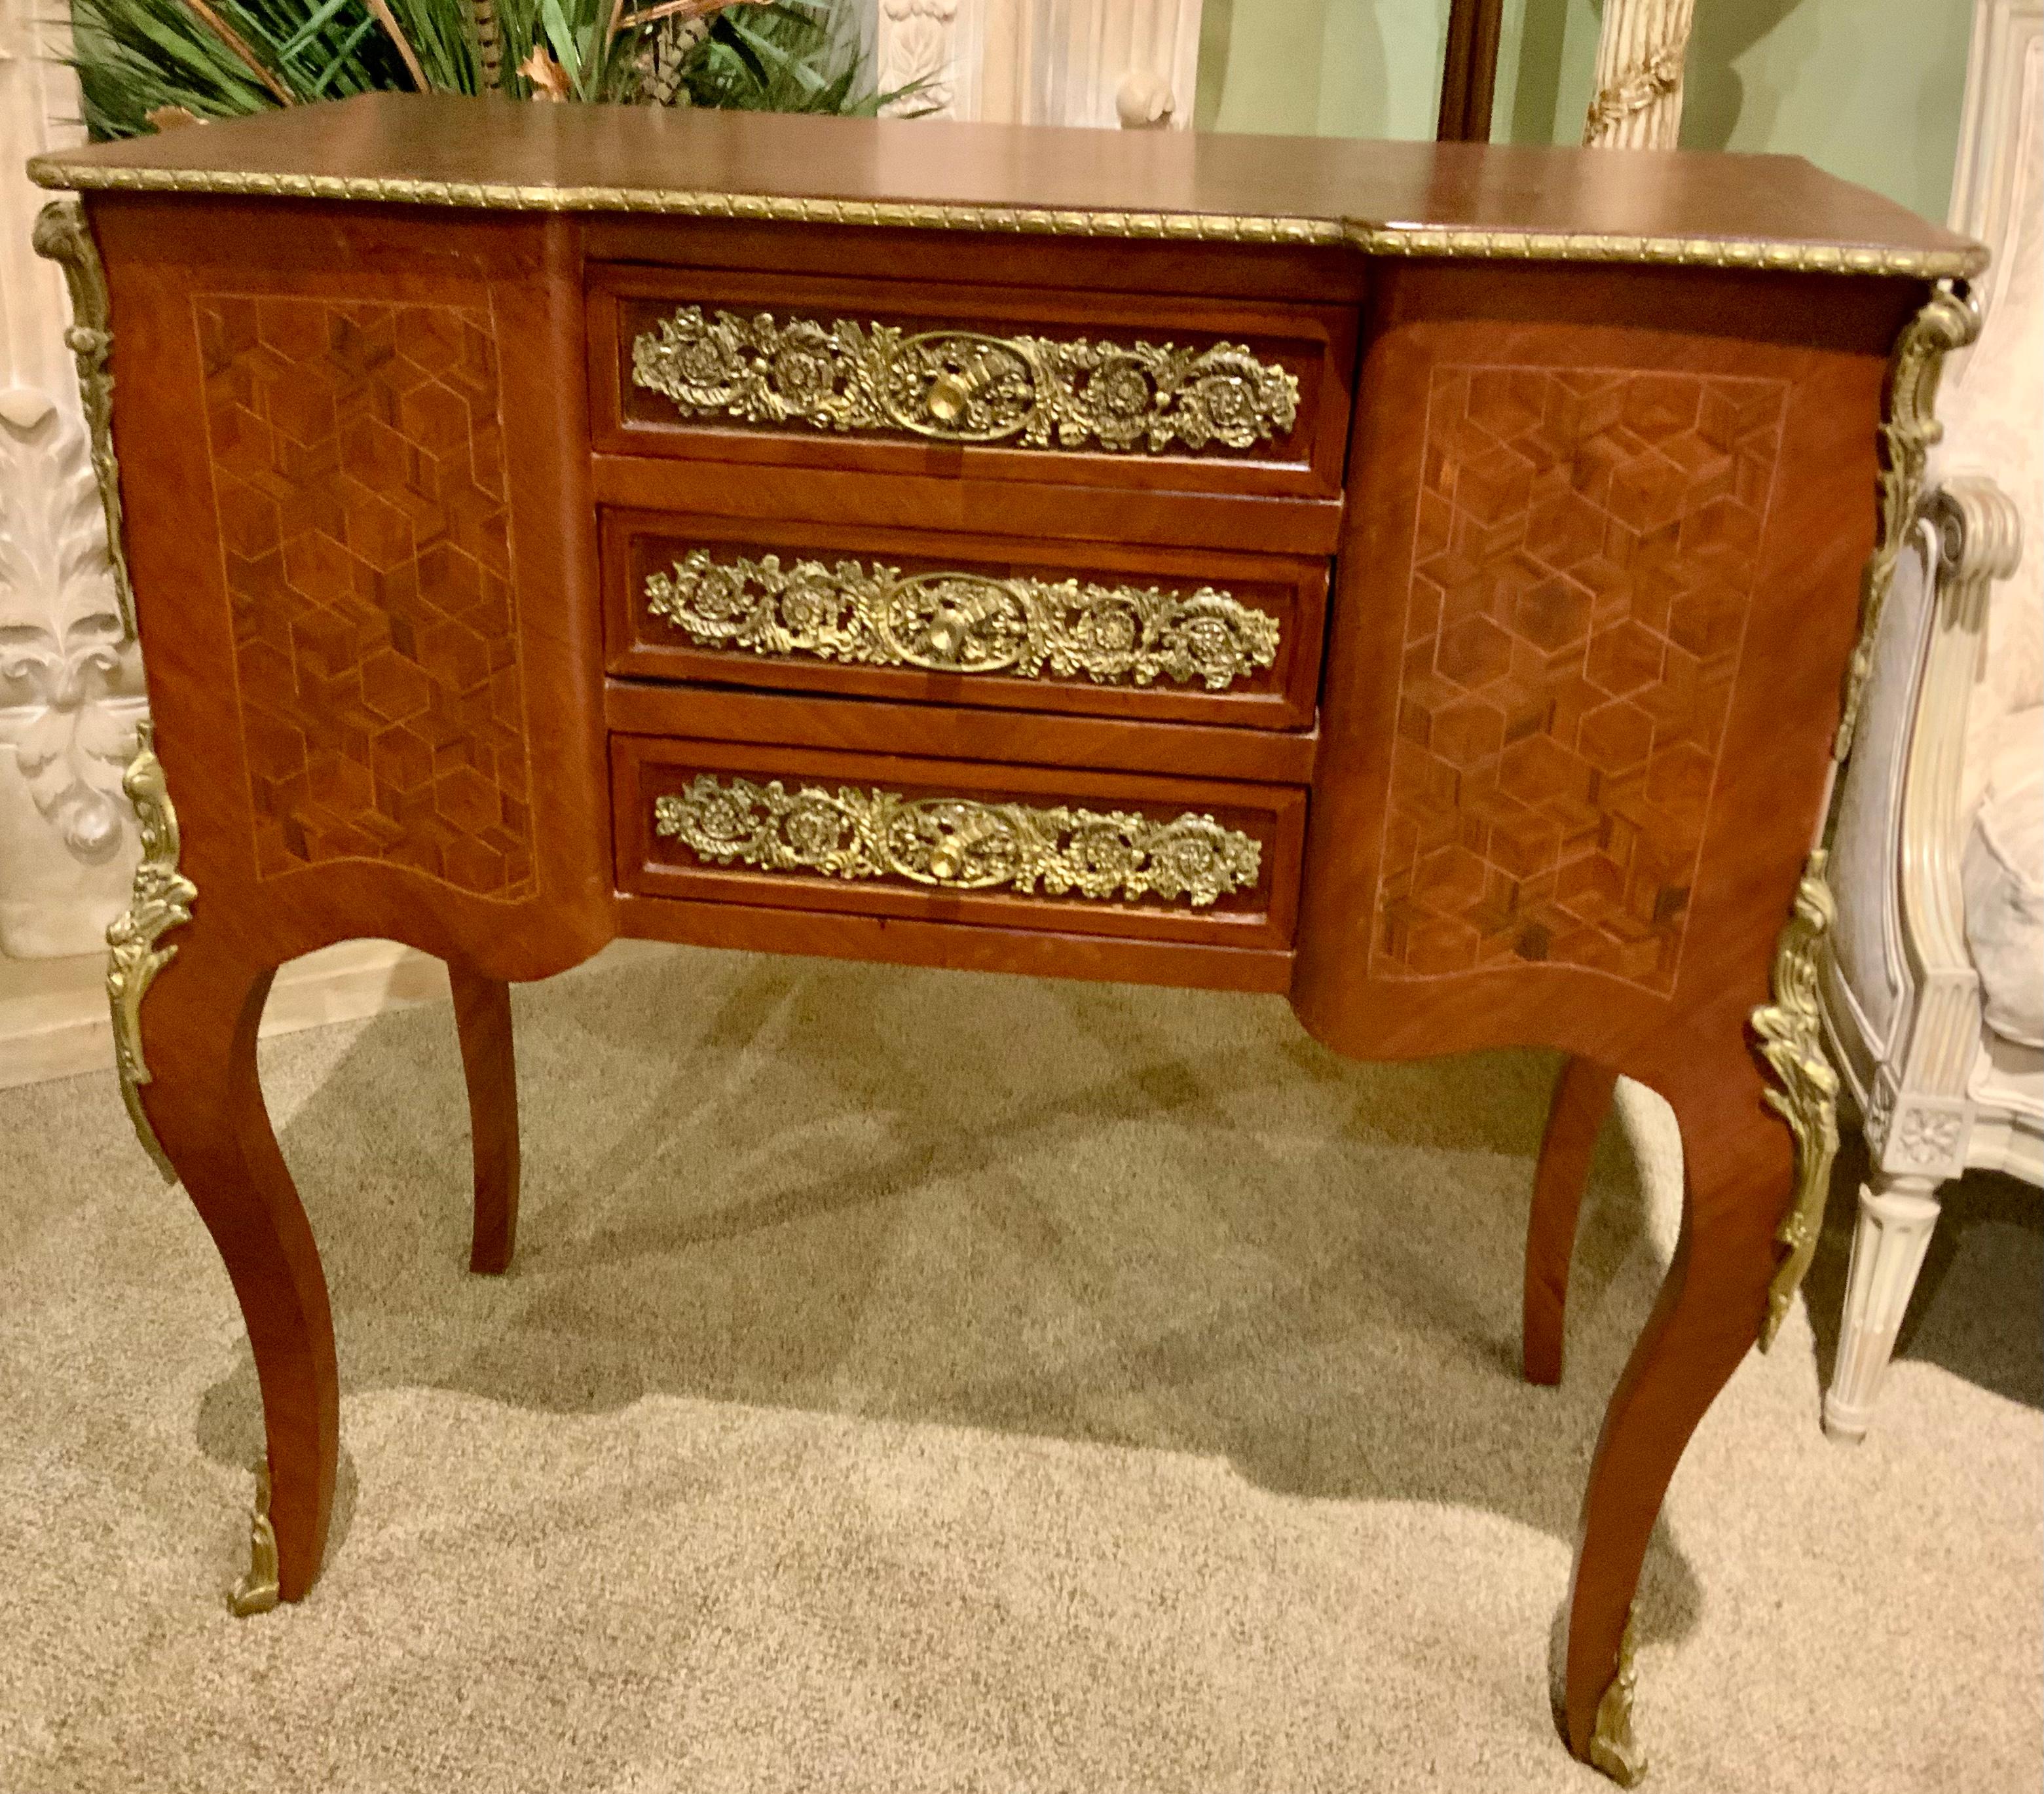 This cabinet could have a multitude of uses. It is a good size to use
Bedside or between two chairs. It has three drawers in the center
Of the piece that draw easily. Scrolling bronze dore ormolu decorates
The front of the drawers with a knob